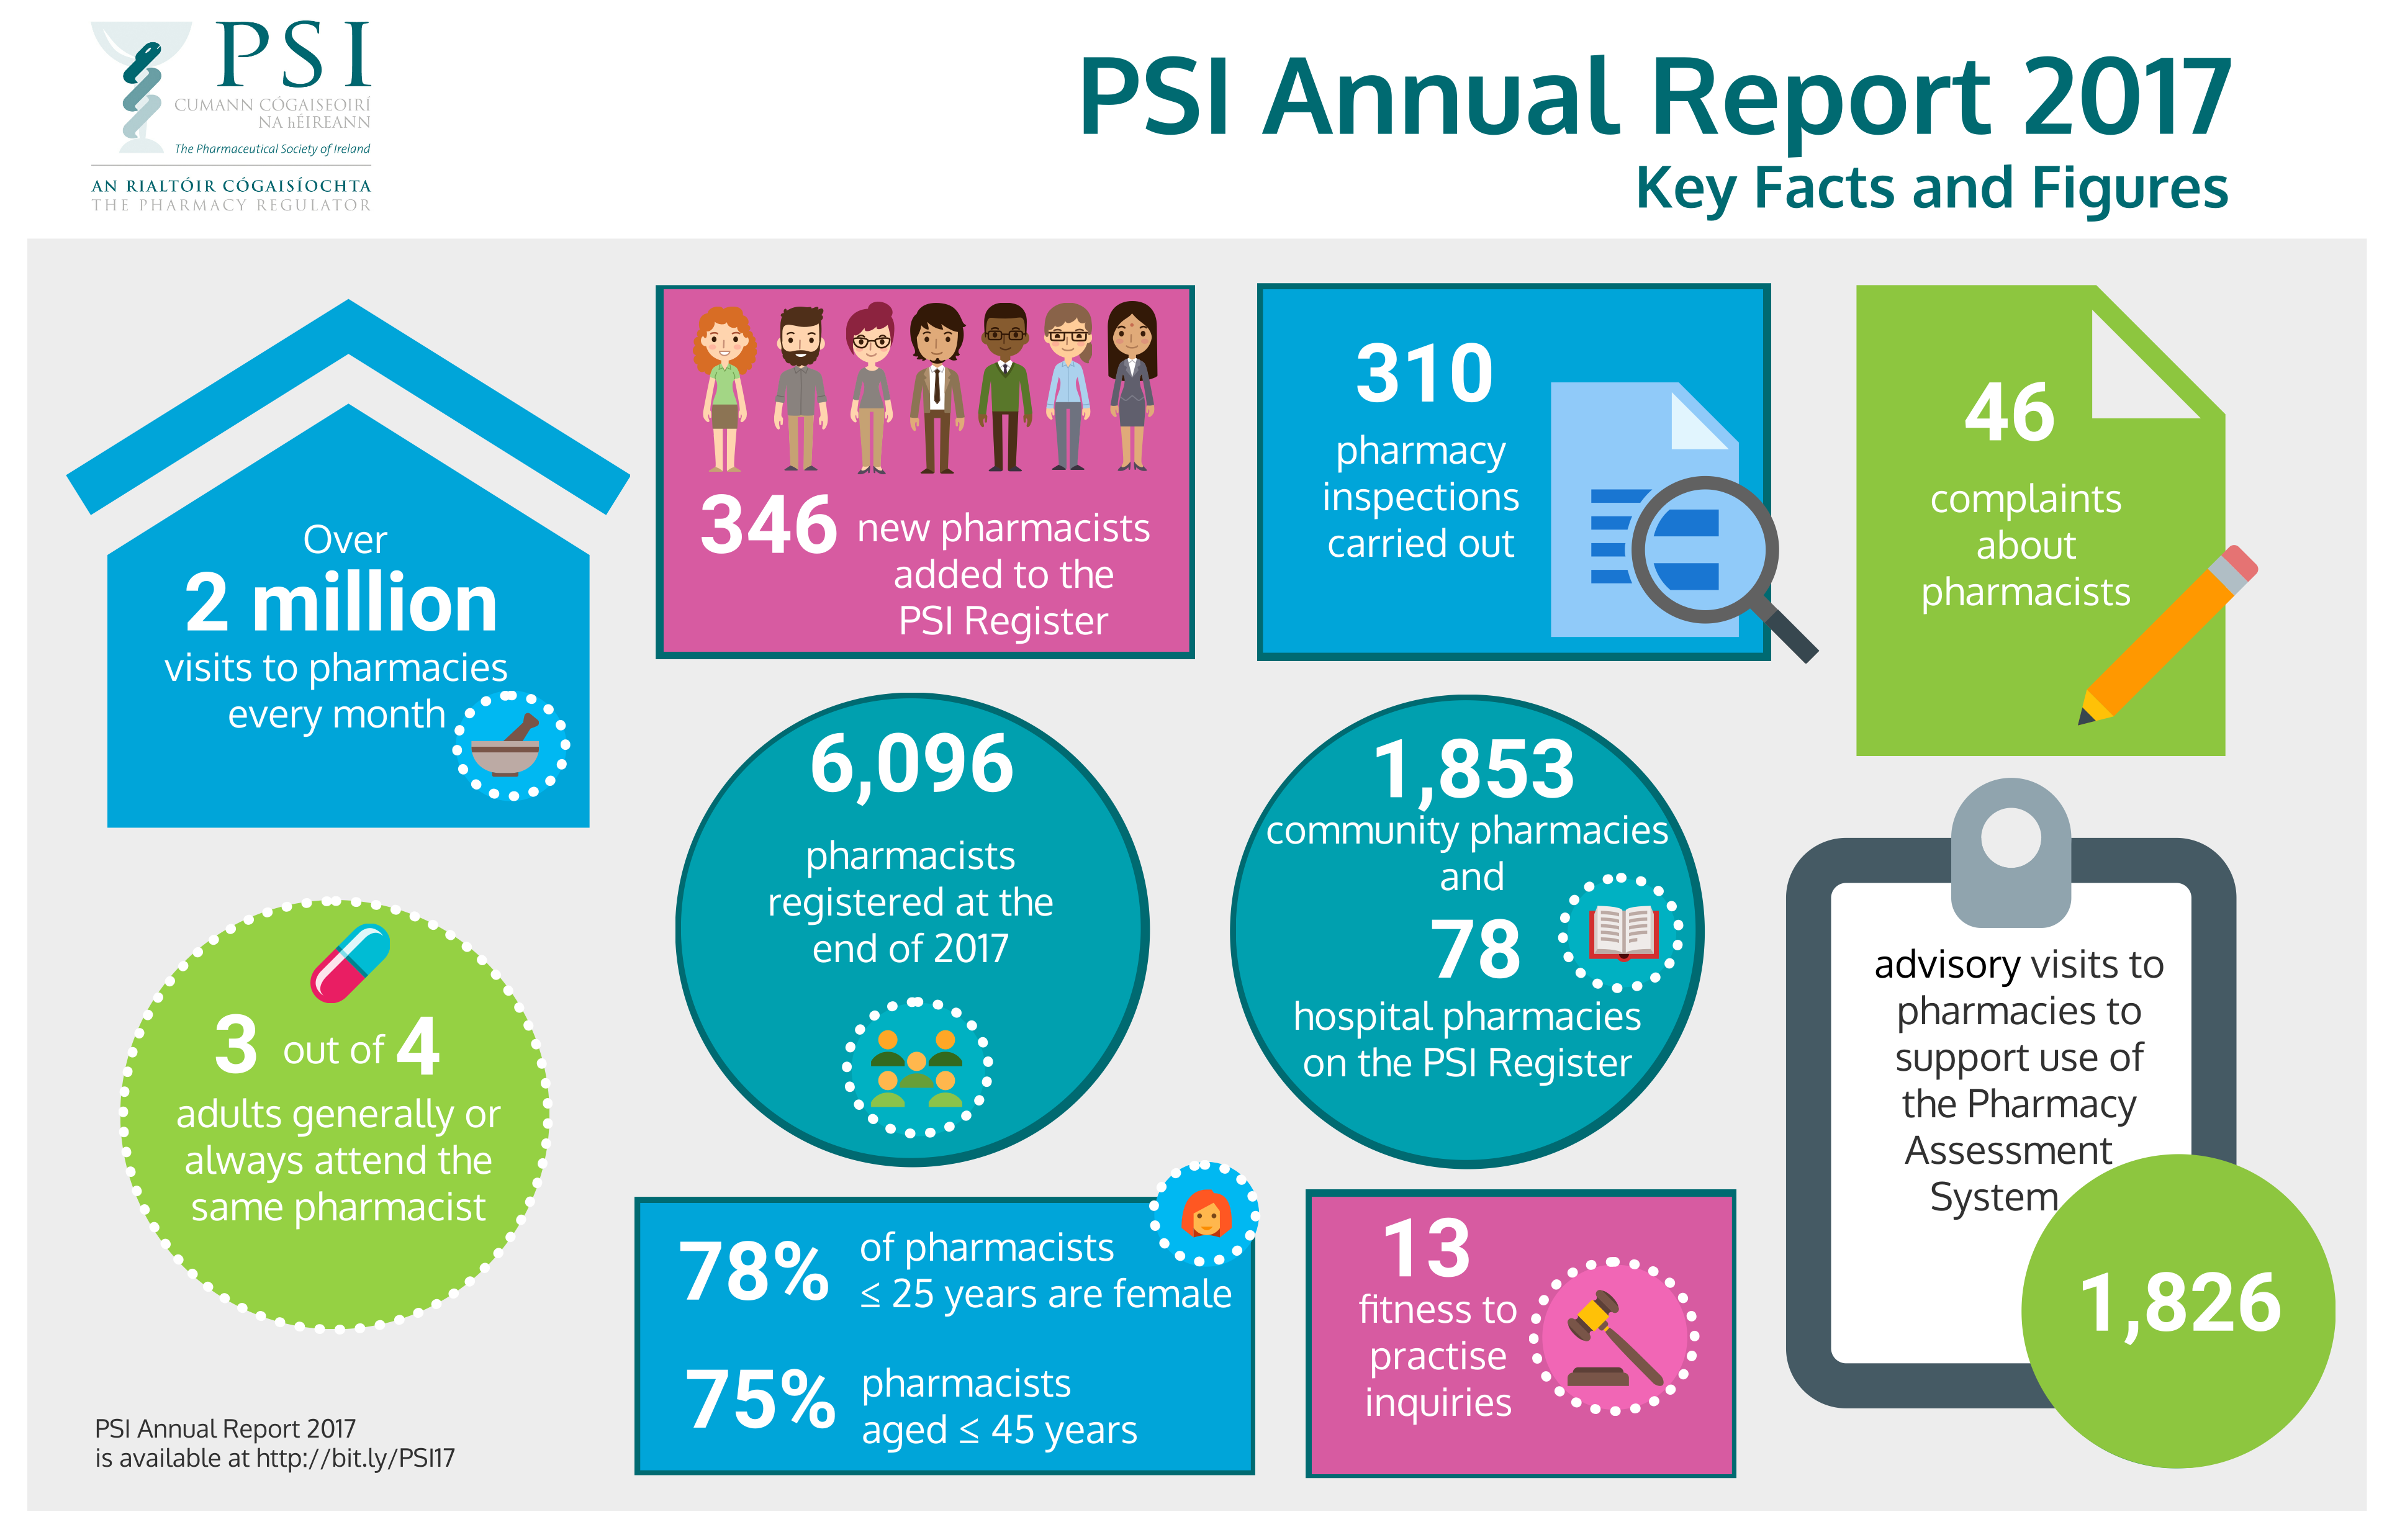 PSI Key Facts and Figures 2017